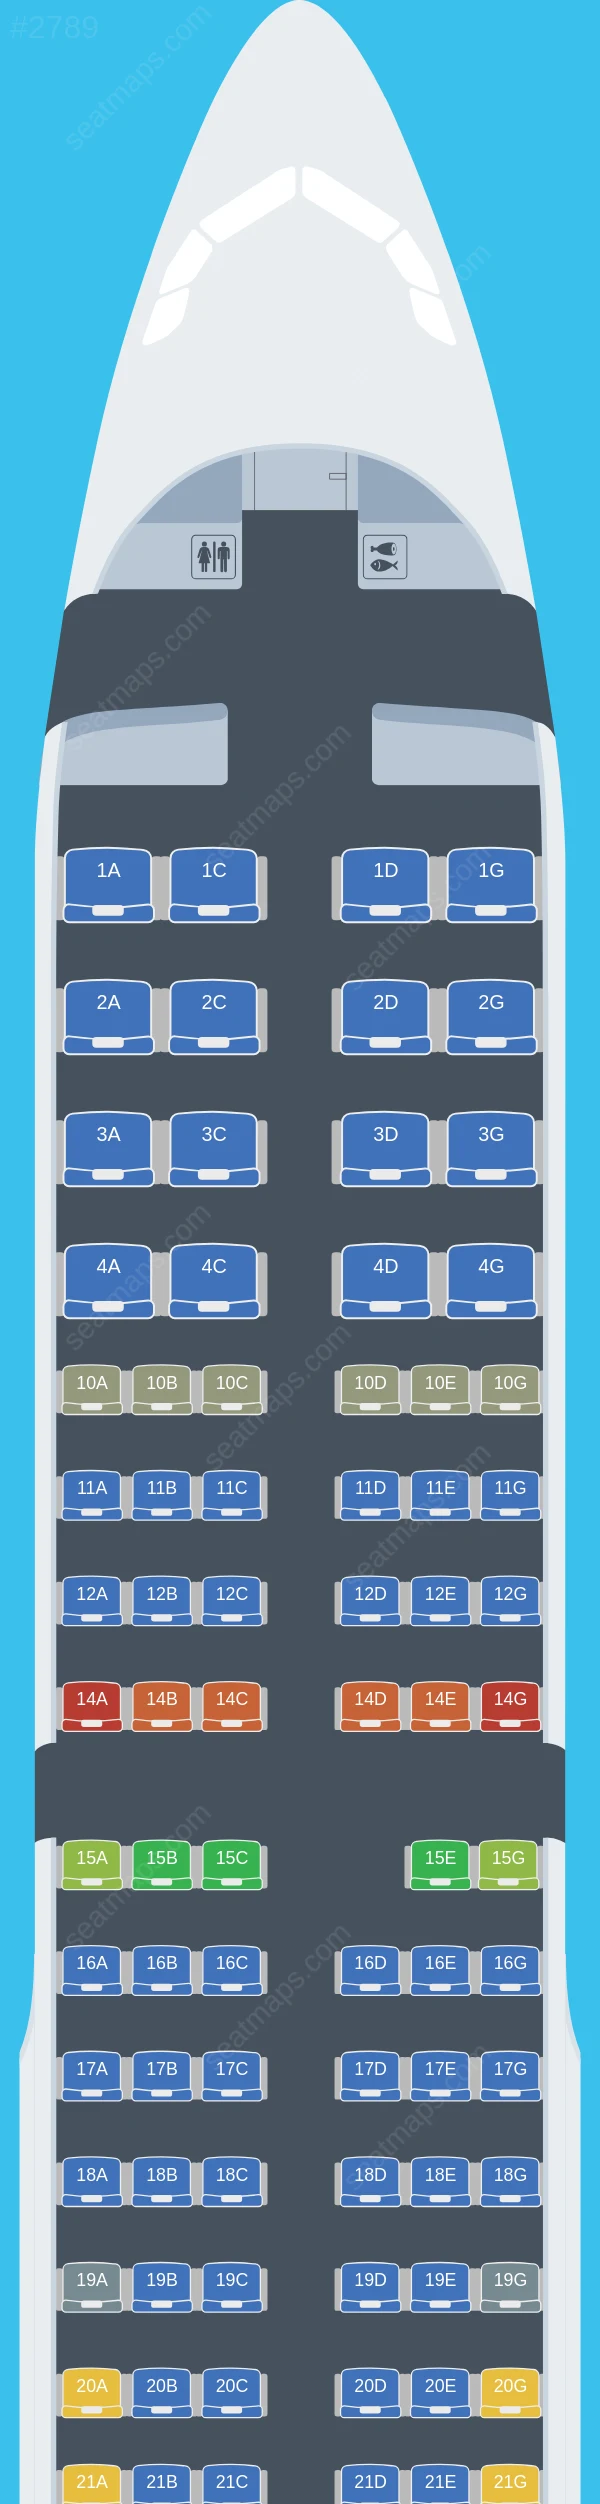 Vietnam Airlines Airbus A321-200 V.1 seatmap preview